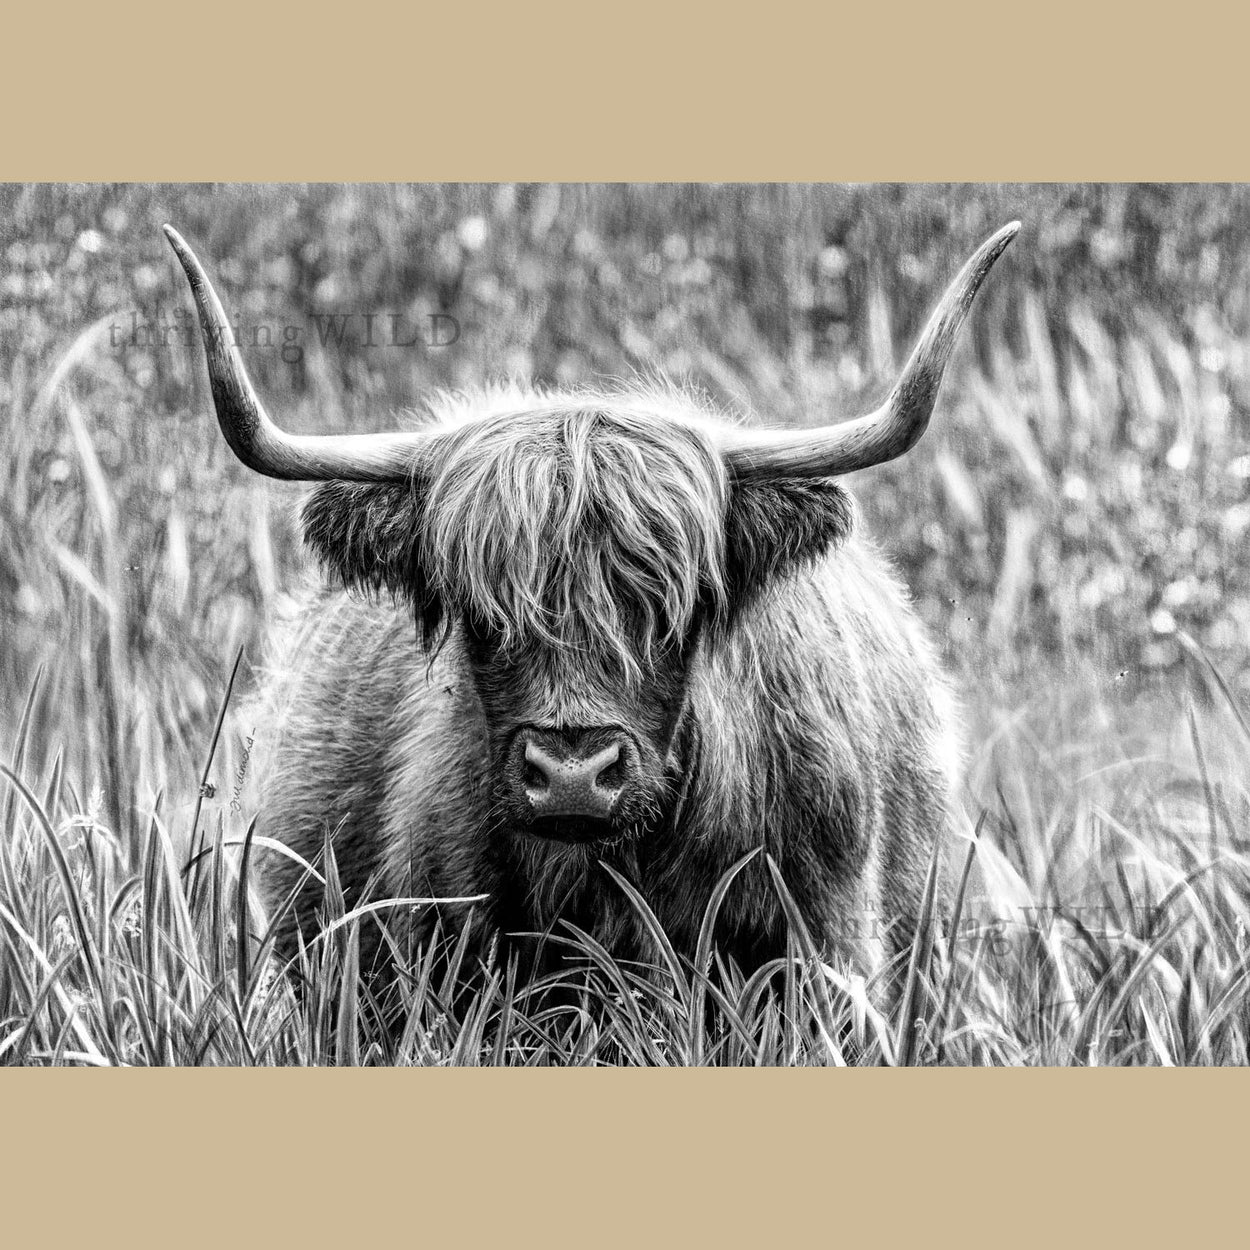 Highland Cow Digital Drawing Procreate - The Thriving Wild